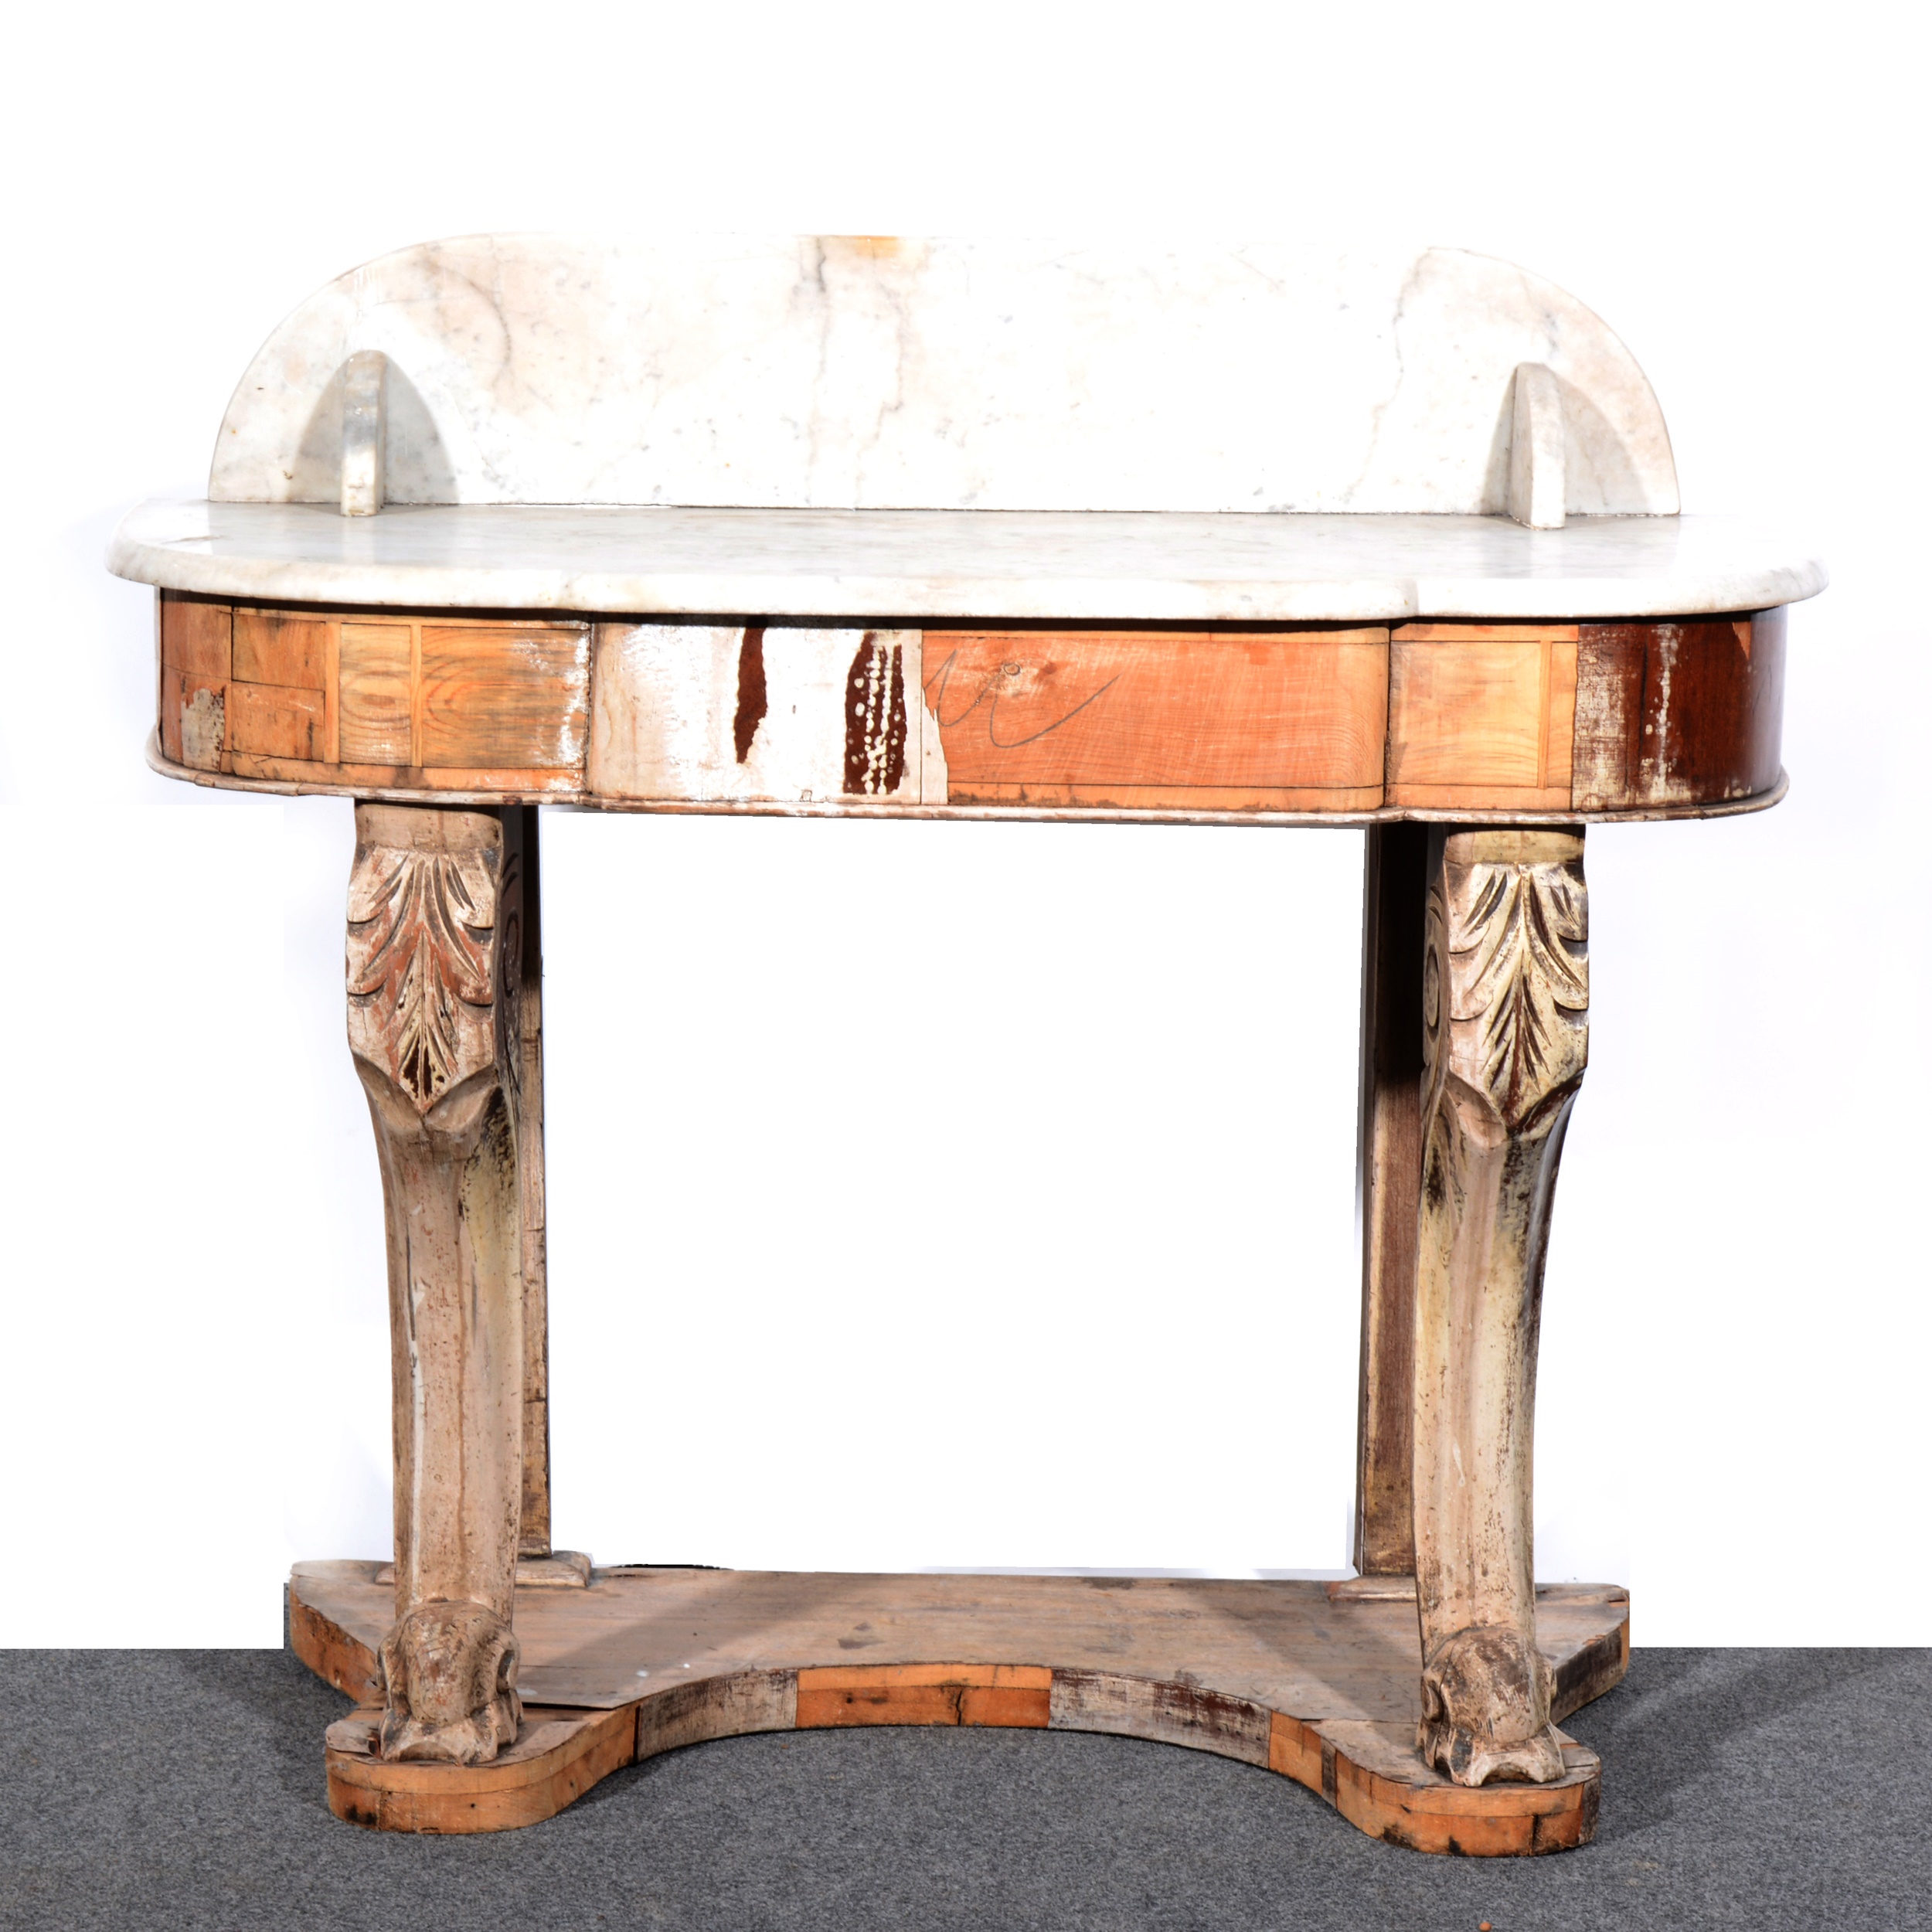 A marble-topped console table, as found